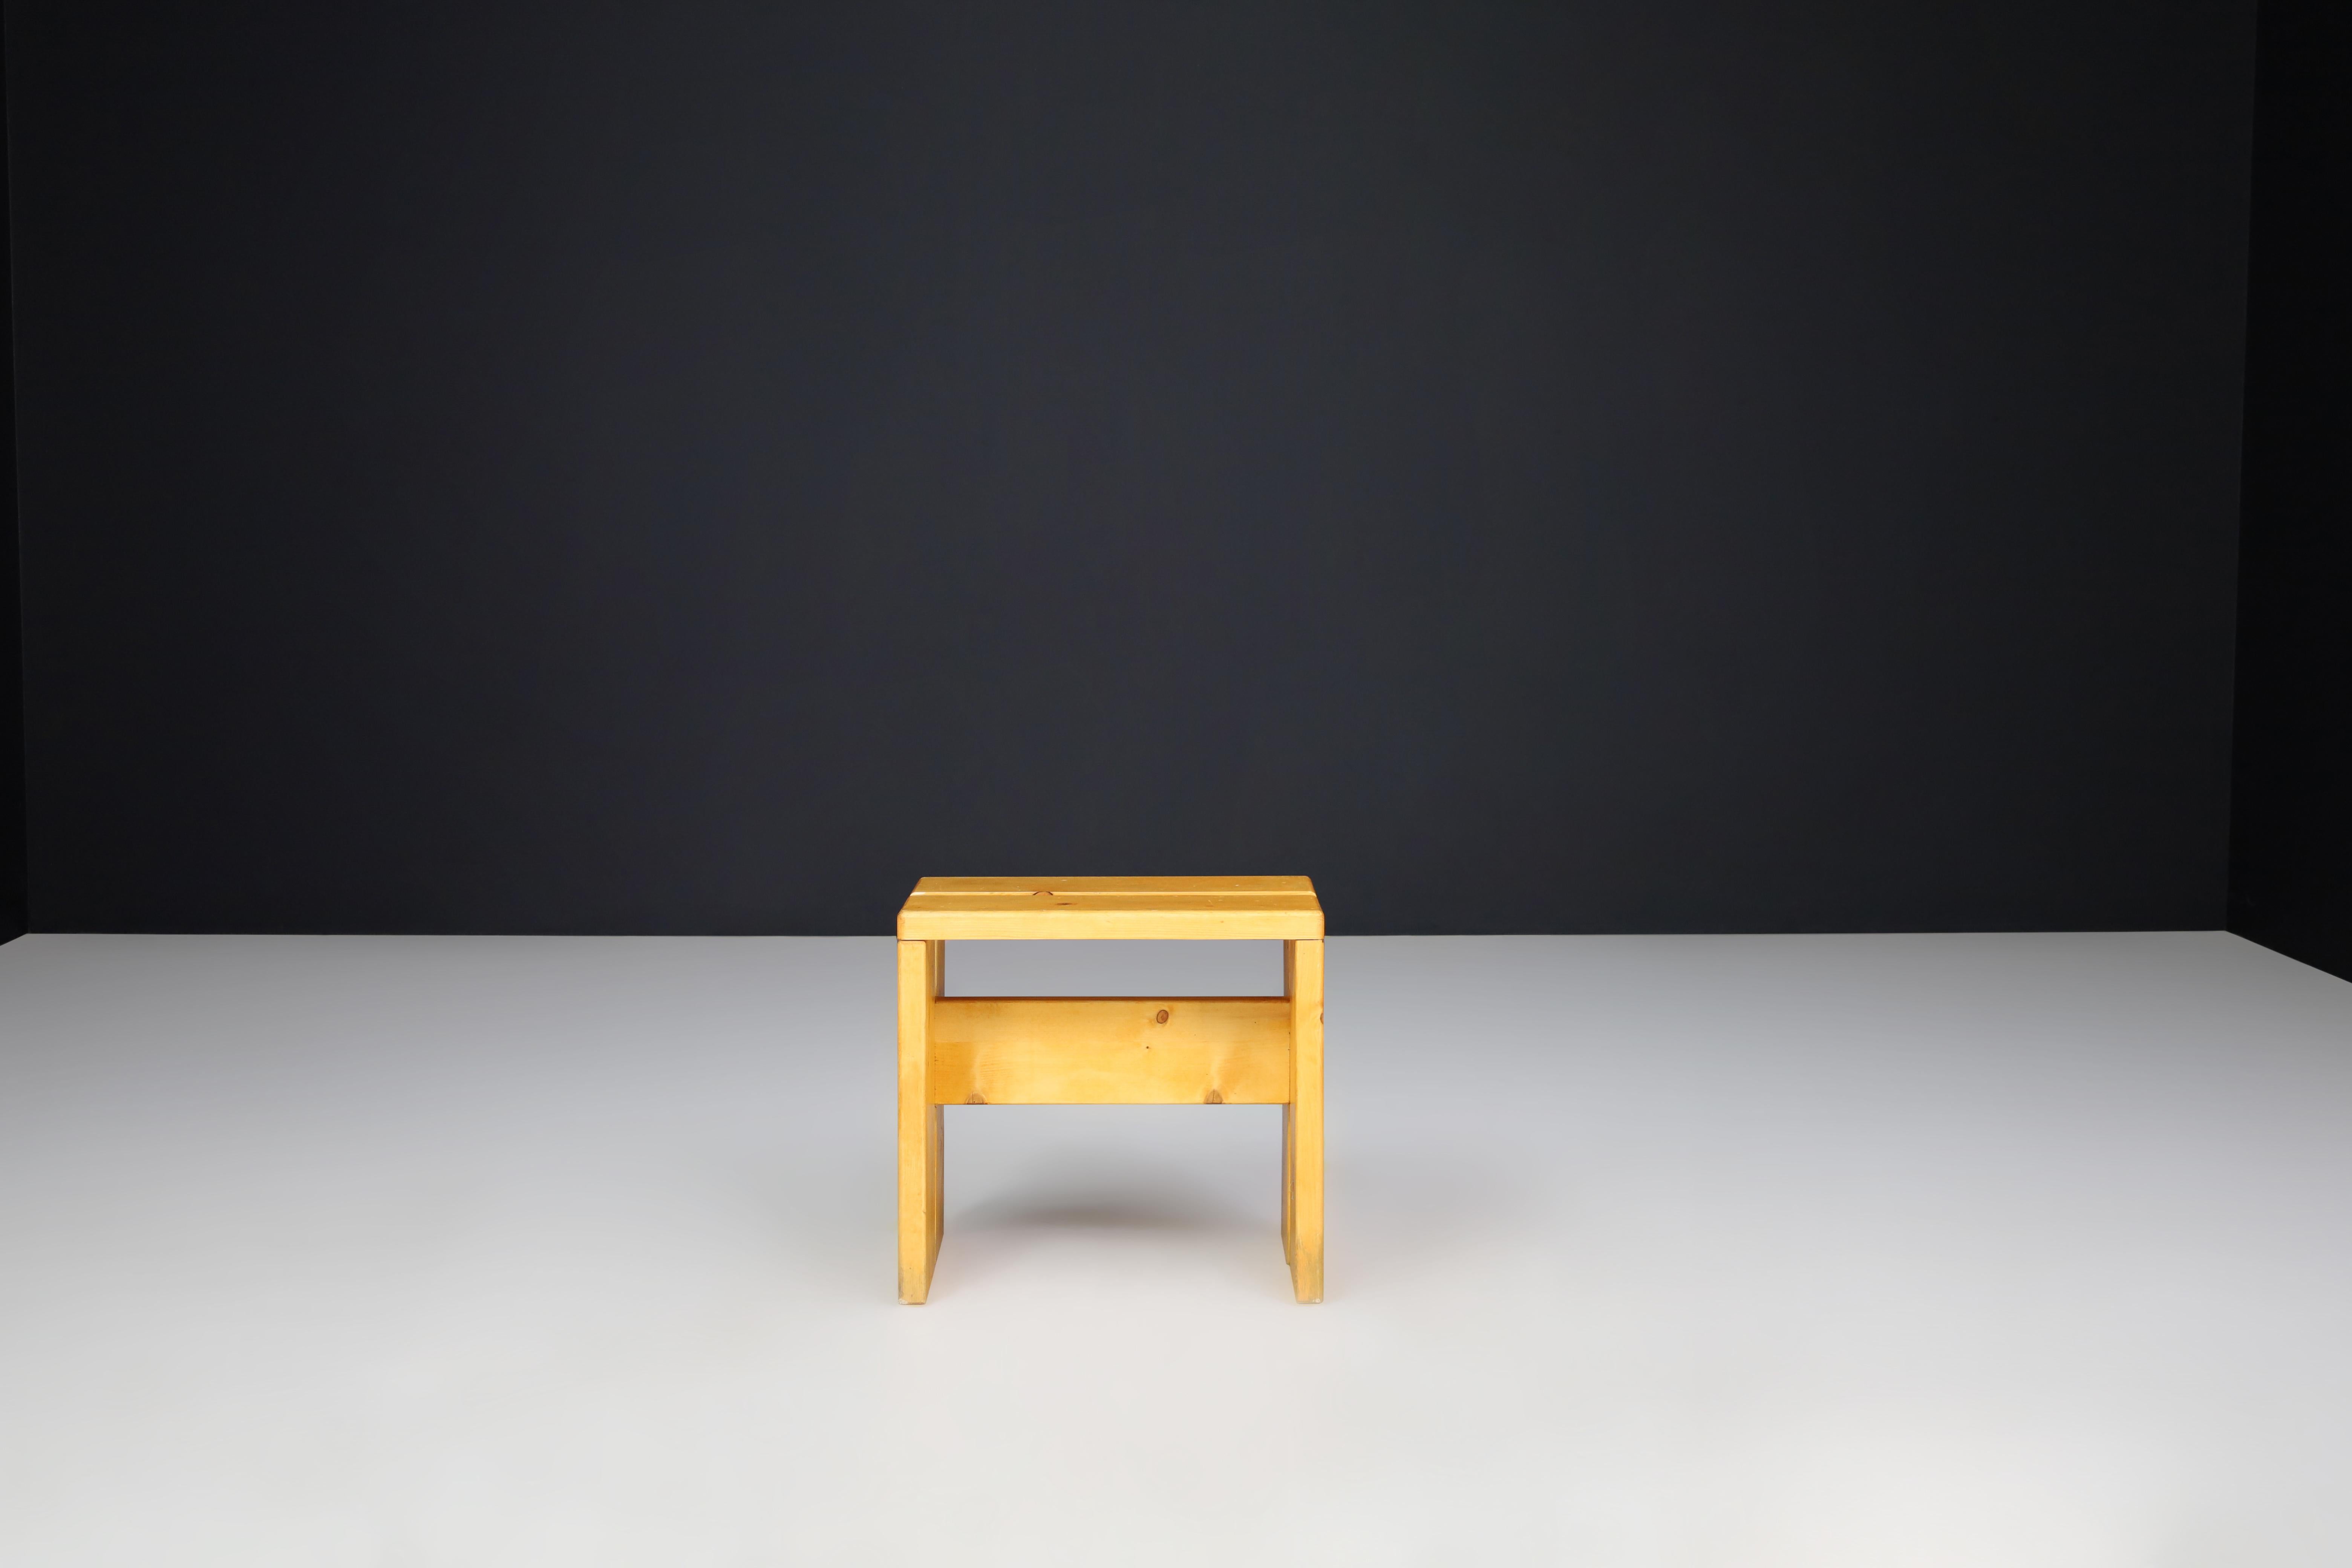 Pine Wood Charlotte Perriand Stool for Les Arcs, France, 1960s For Sale 2